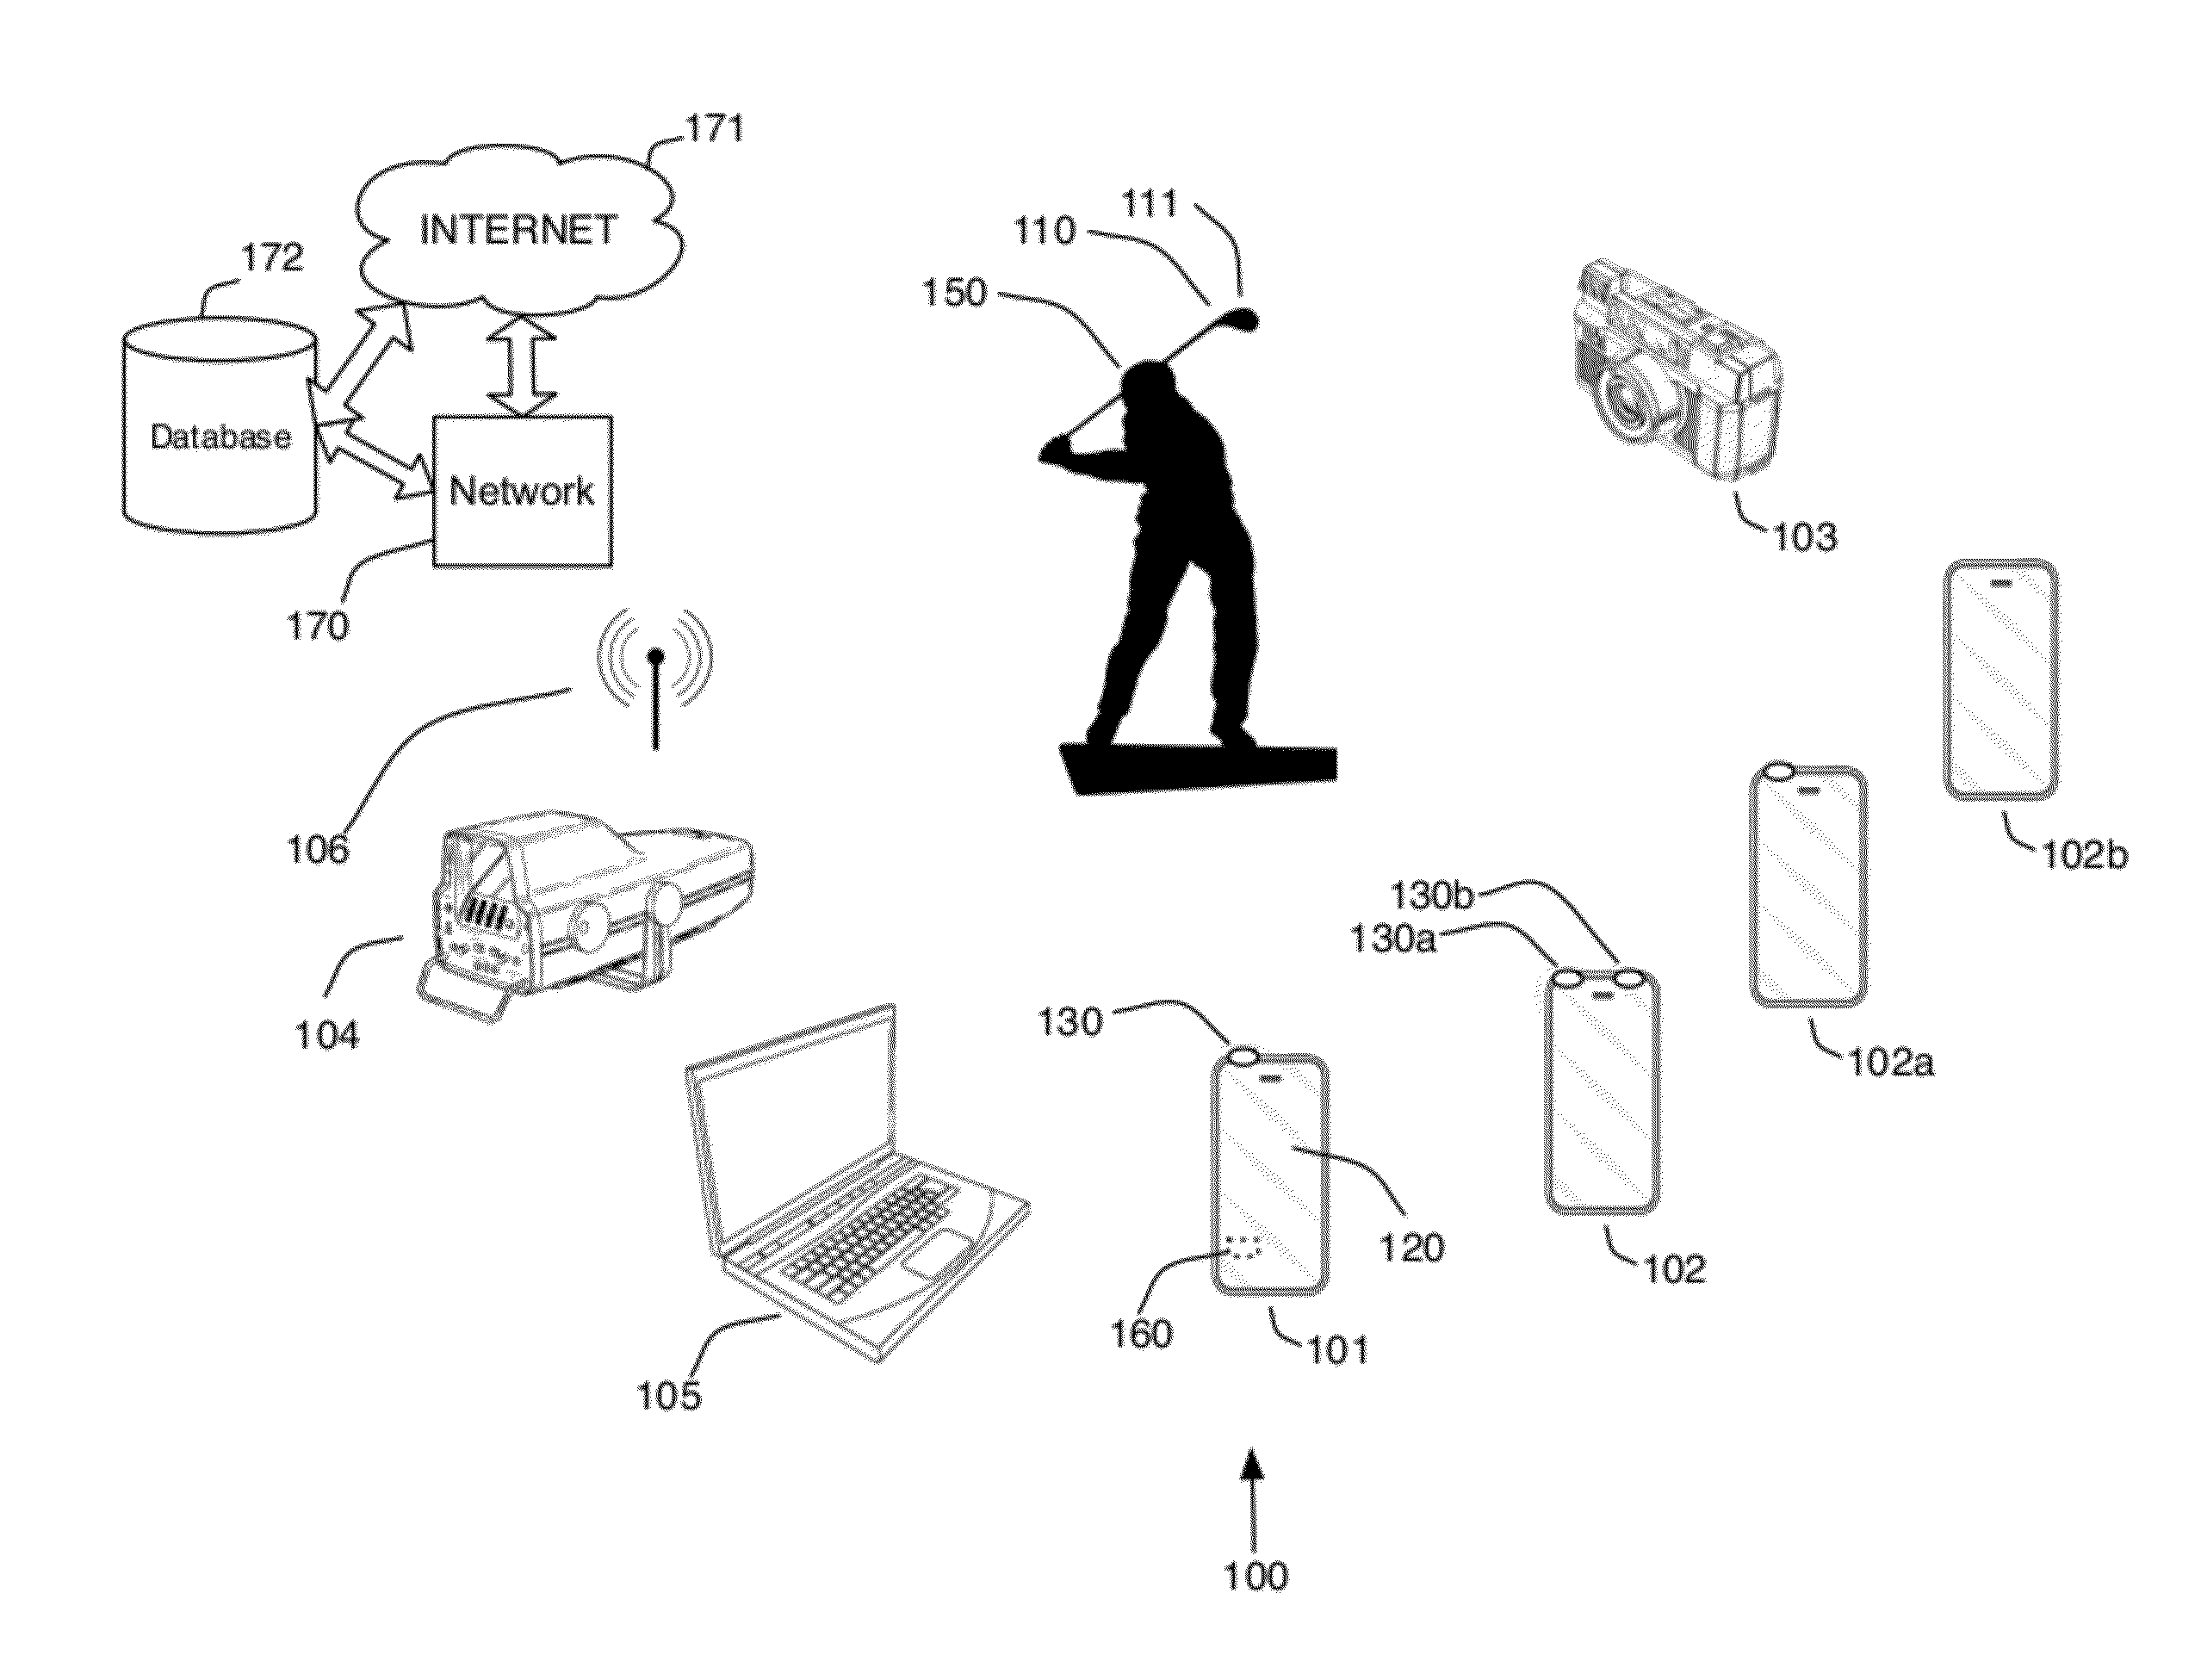 Portable wireless mobile device motion capture and analysis system and method